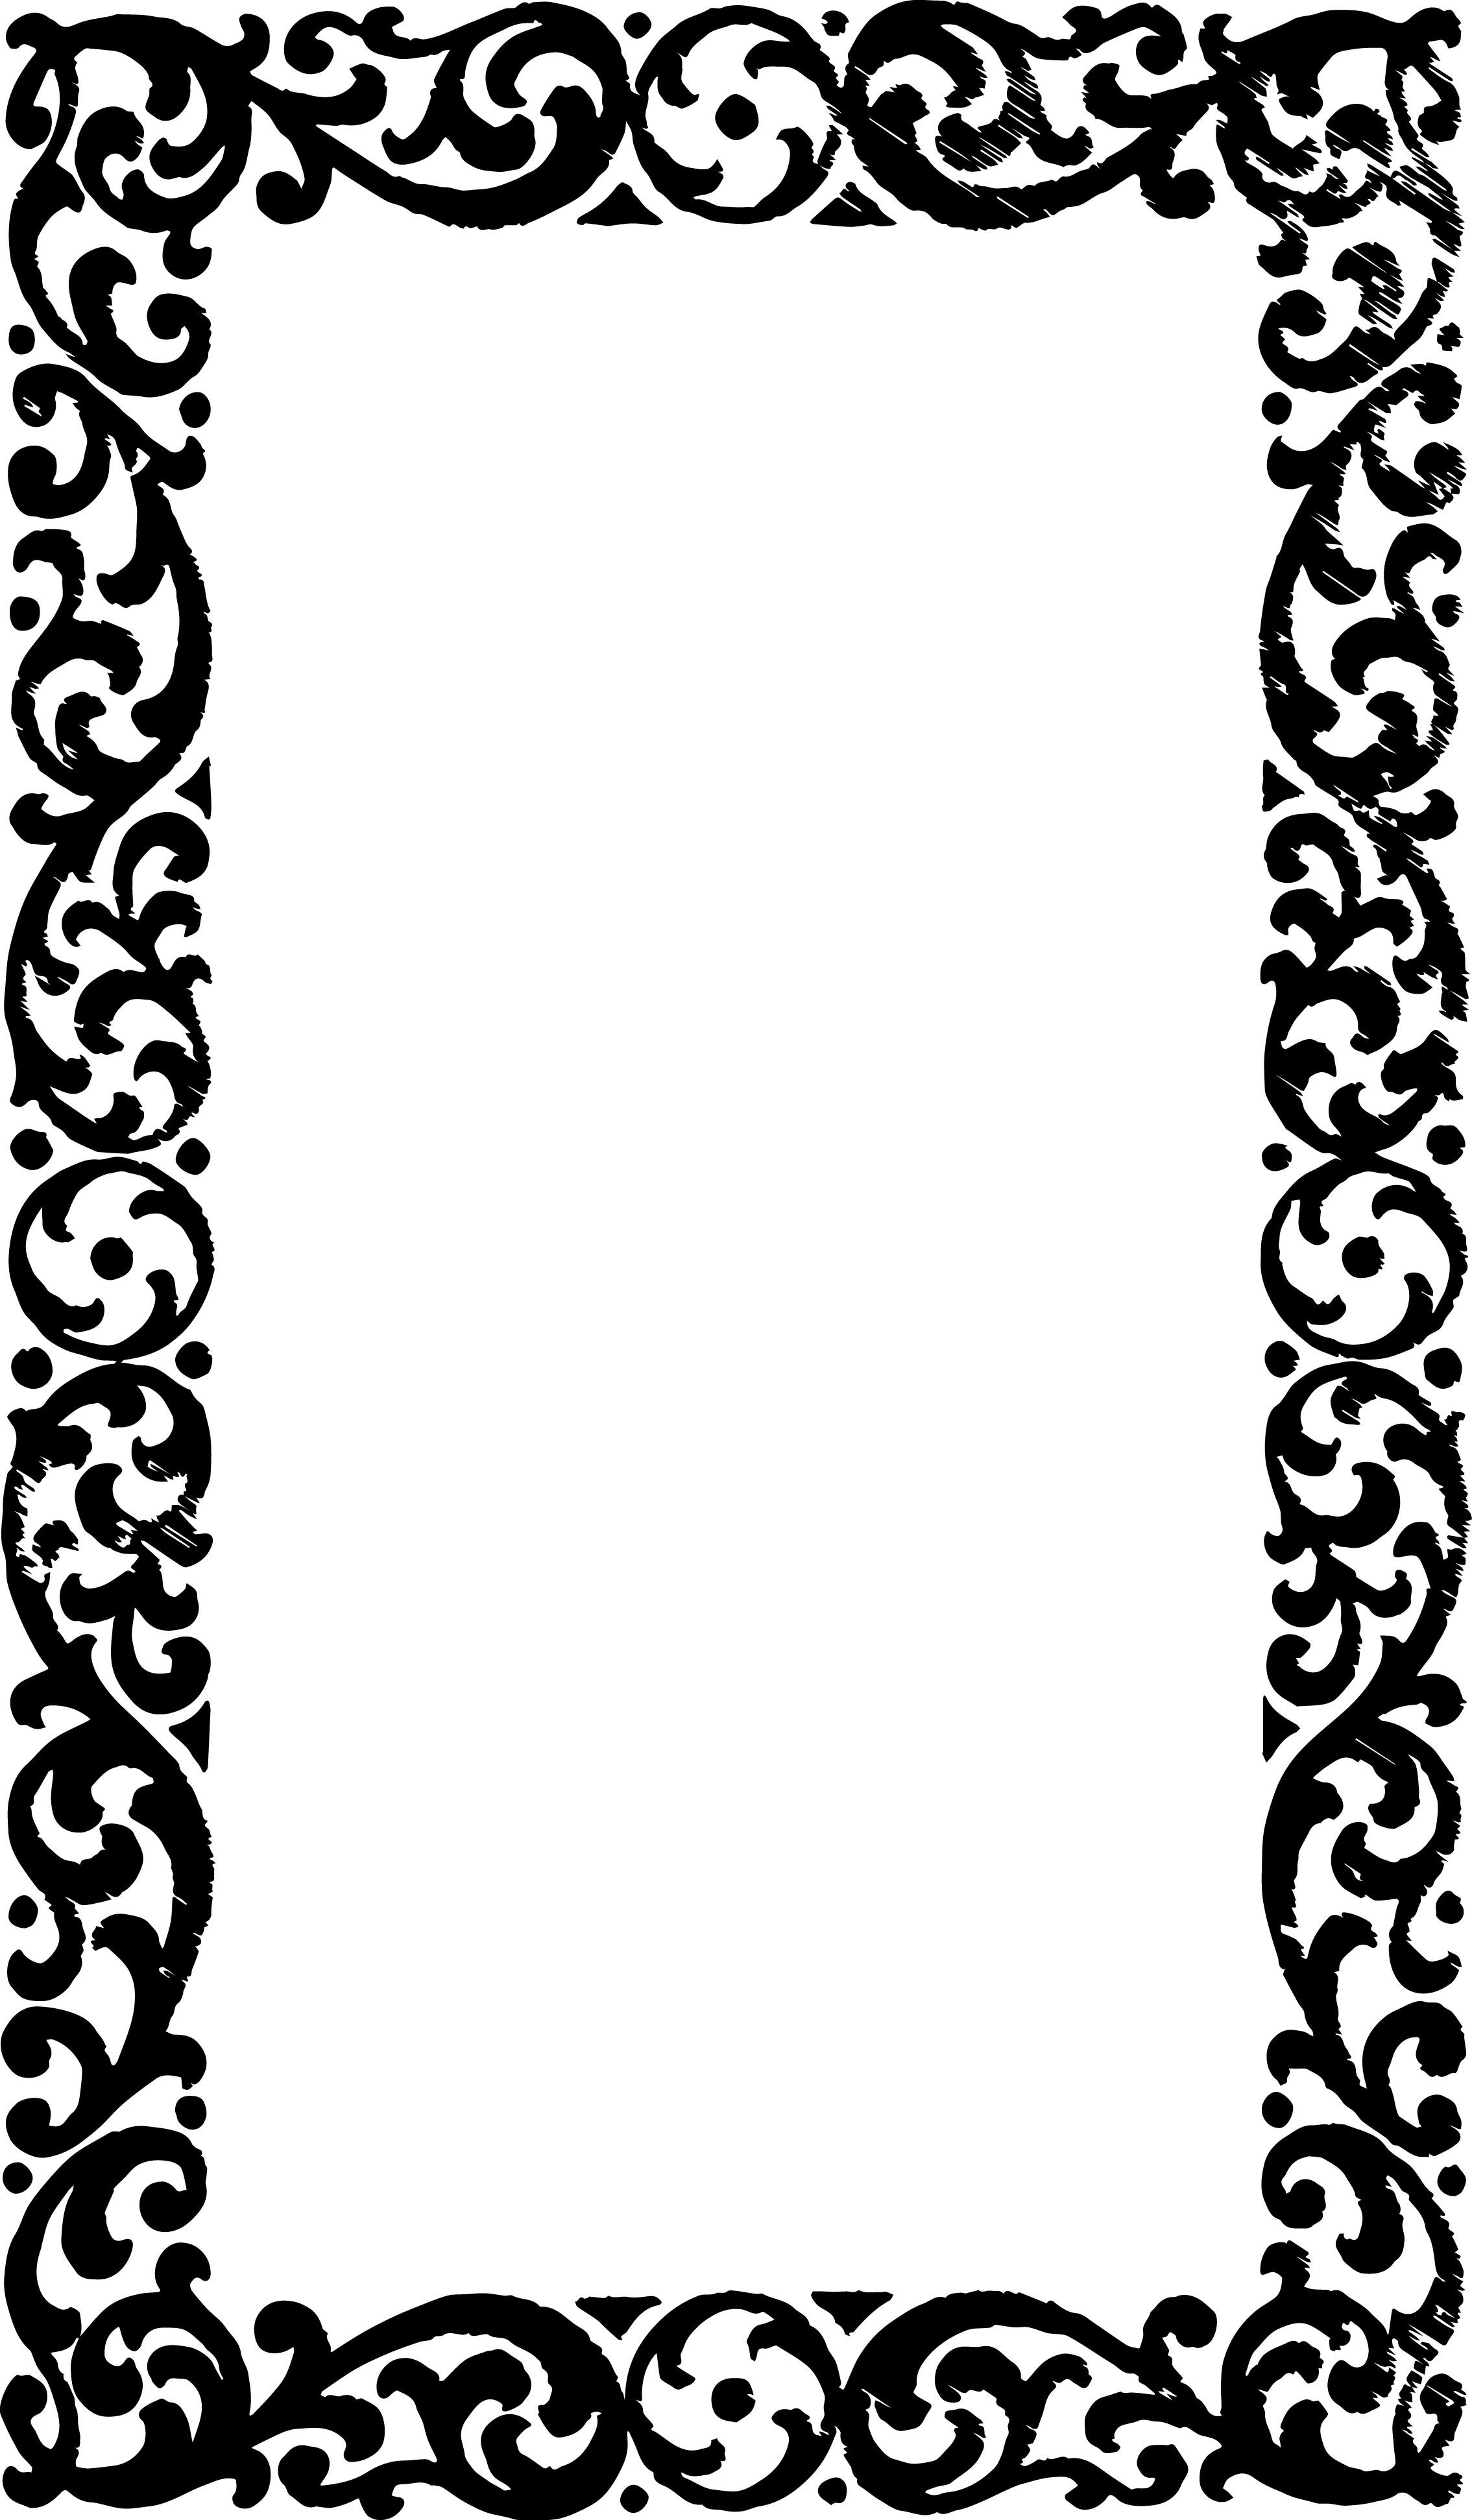 Royalty Free Borders Cliparts co